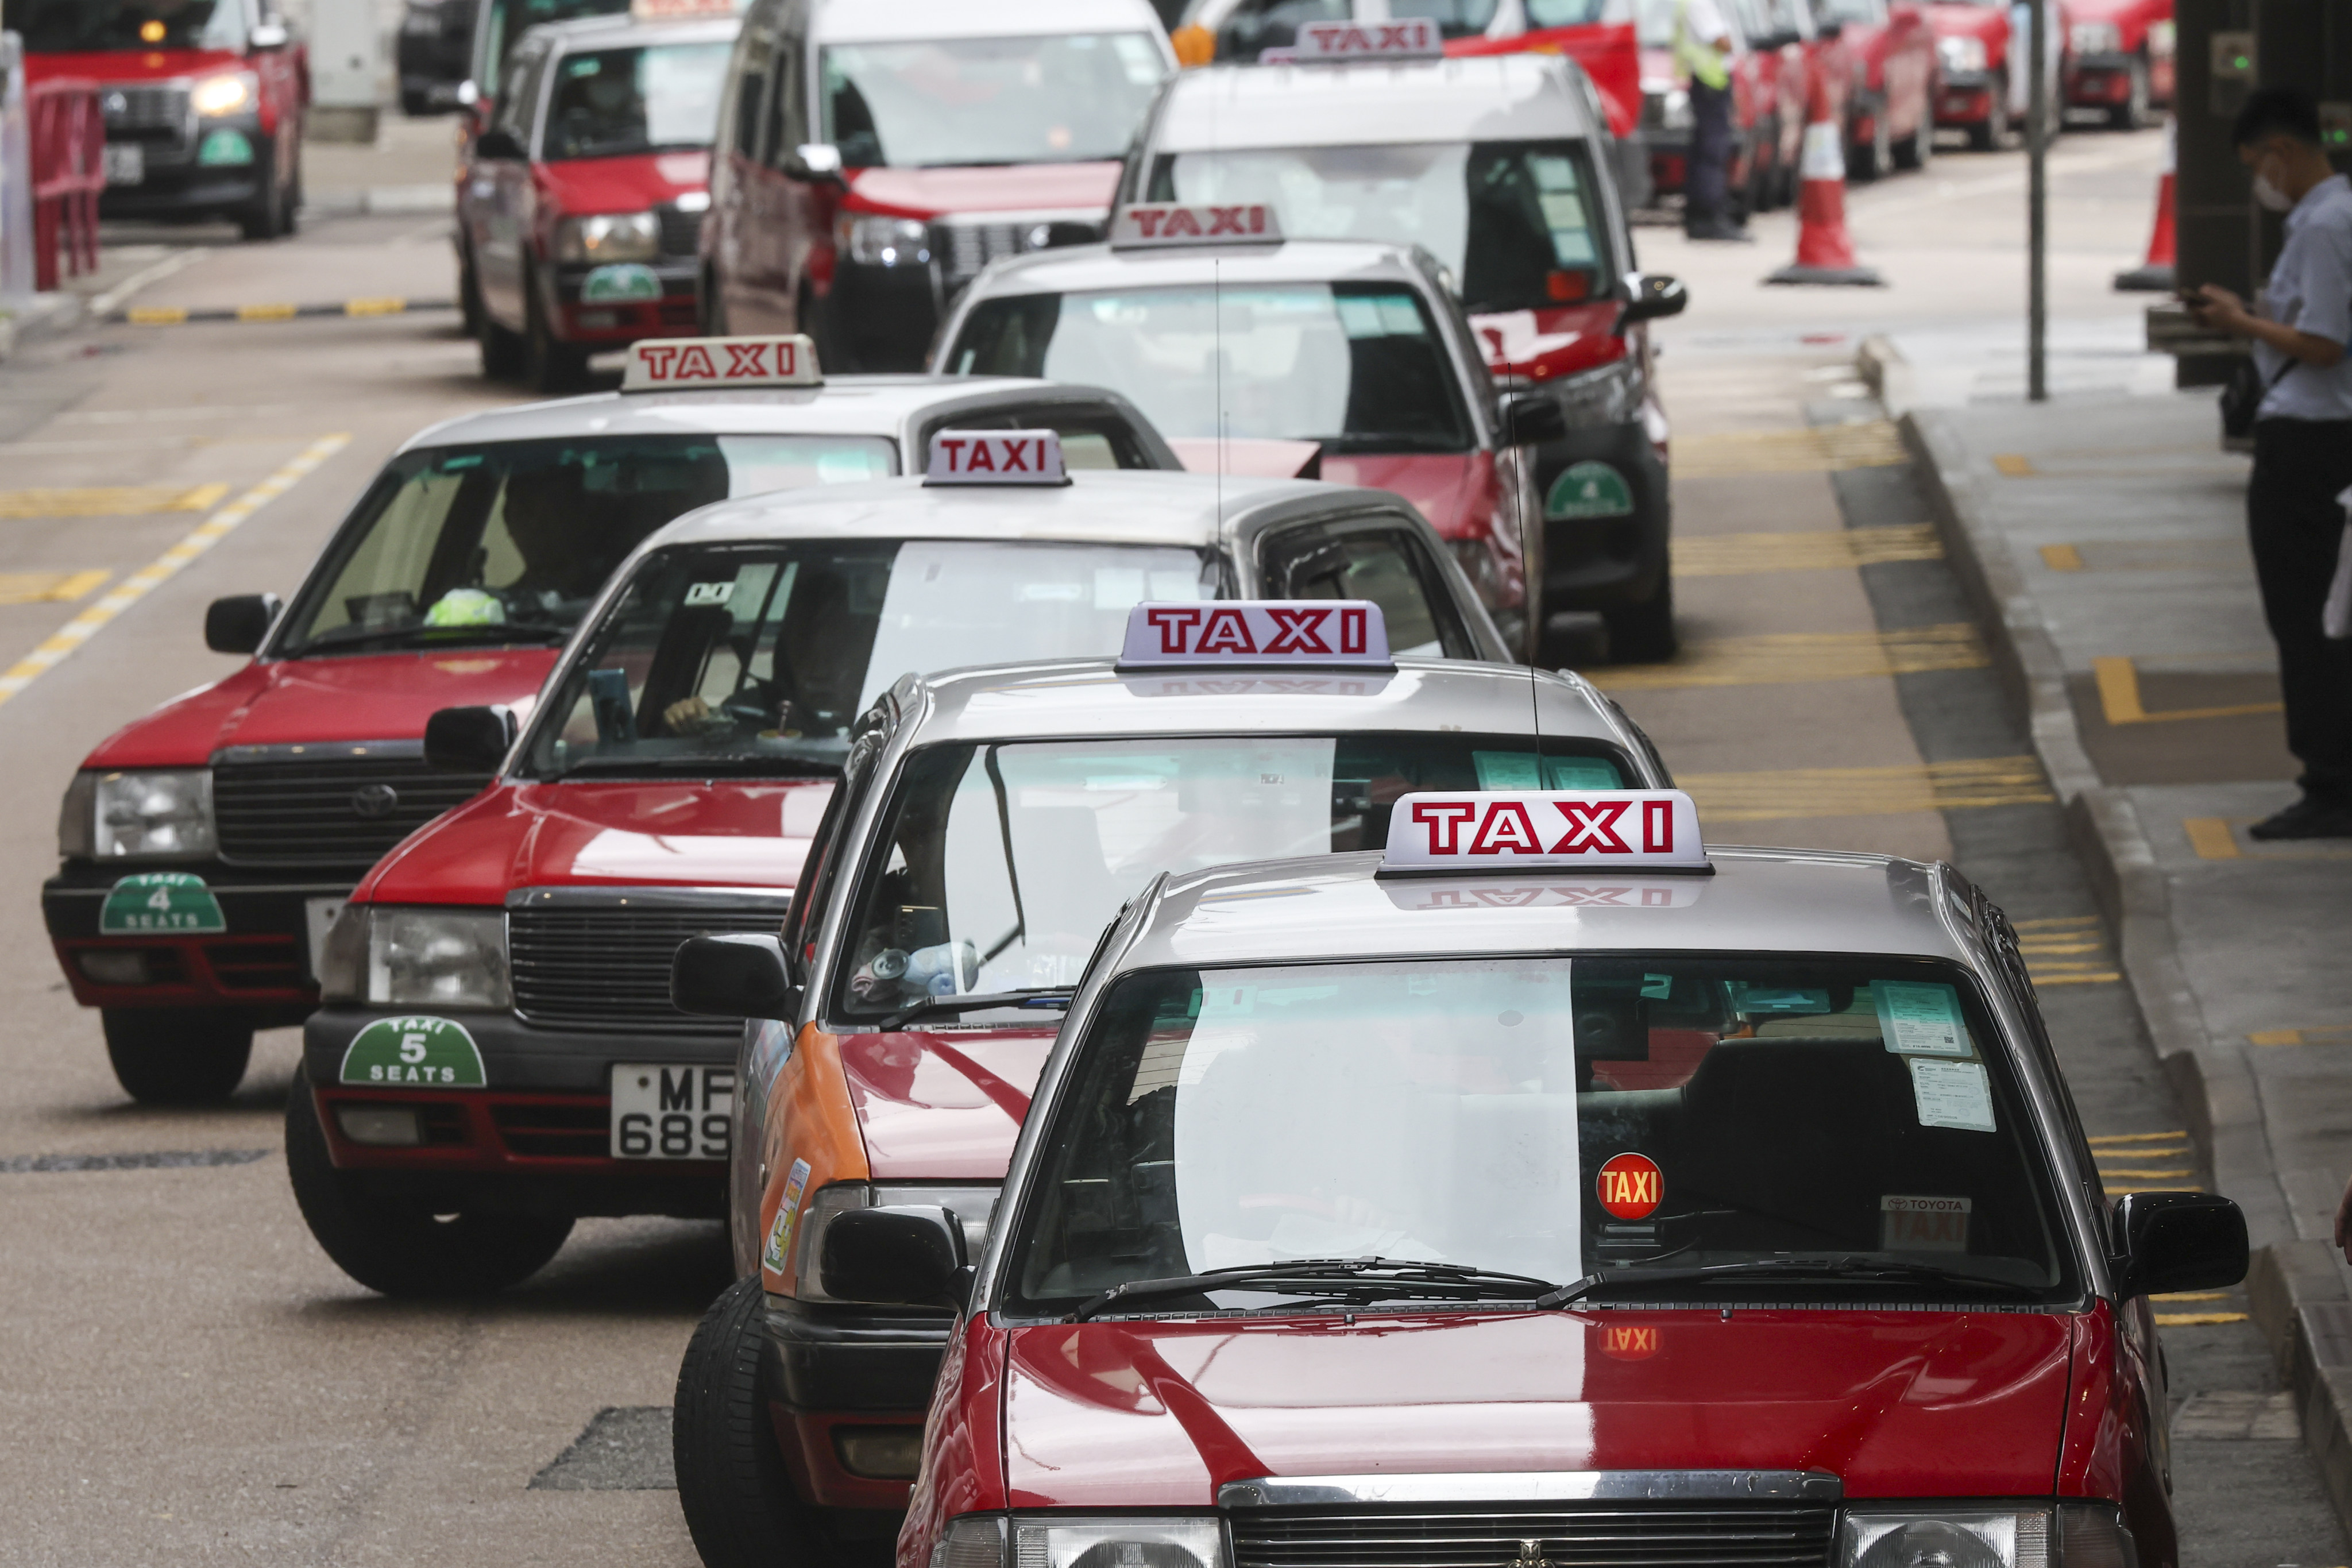 The Hong Kong government hopes to create a taxi fleet regime that will improve industry service standards. Photo: Edmond So